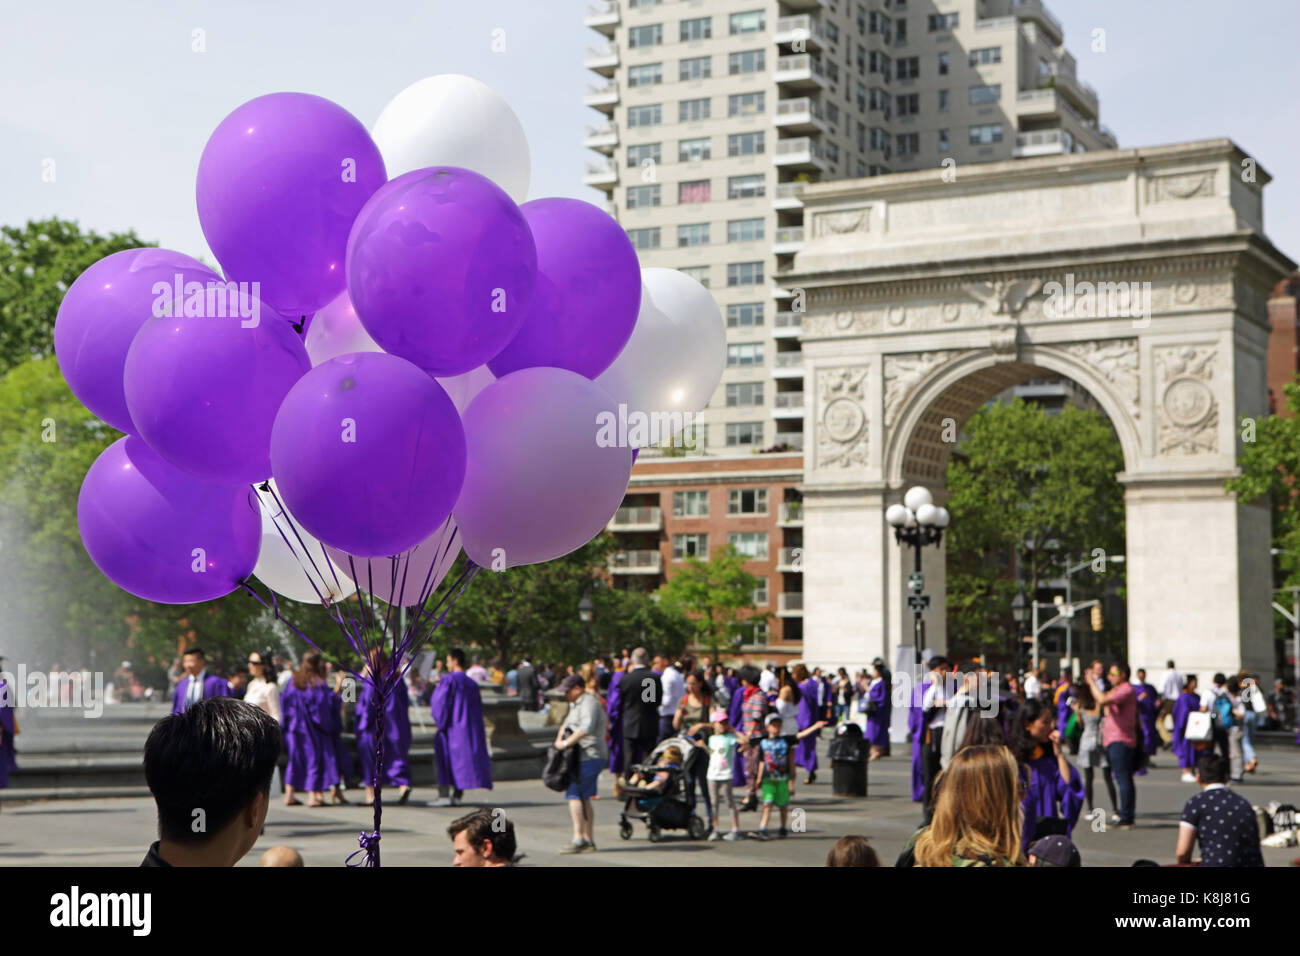 New York, NY, USA - May 16, 2017: New York University students, in caps and gowns, gather in Washington Square Park to celebrate graduation Stock Photo